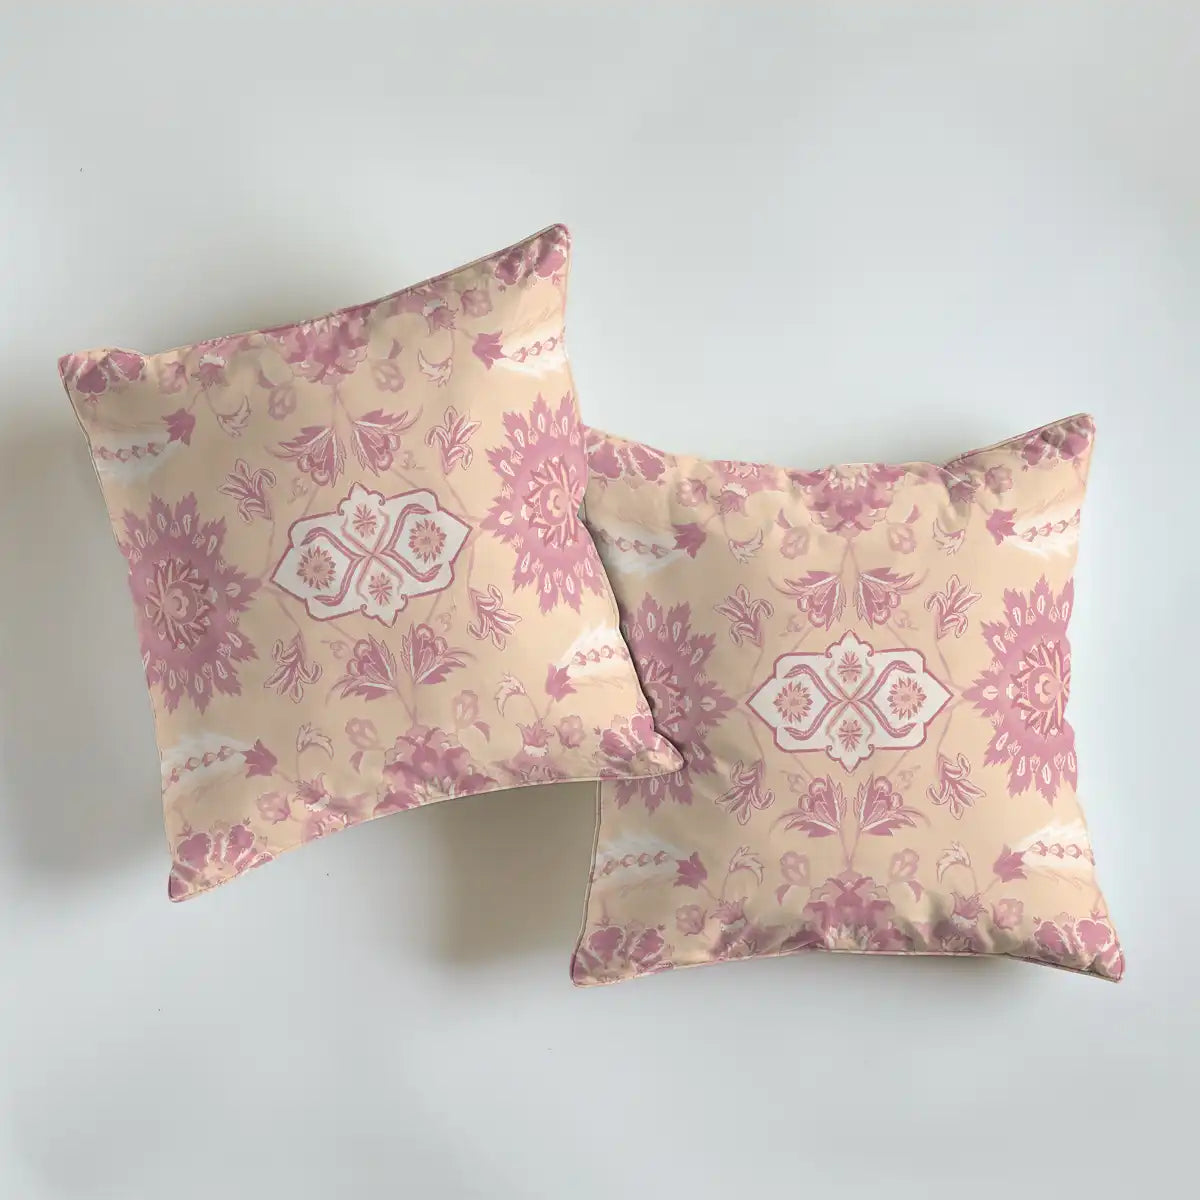 Buy Online Firdaus Cushion Cover, Set of 2 Pink